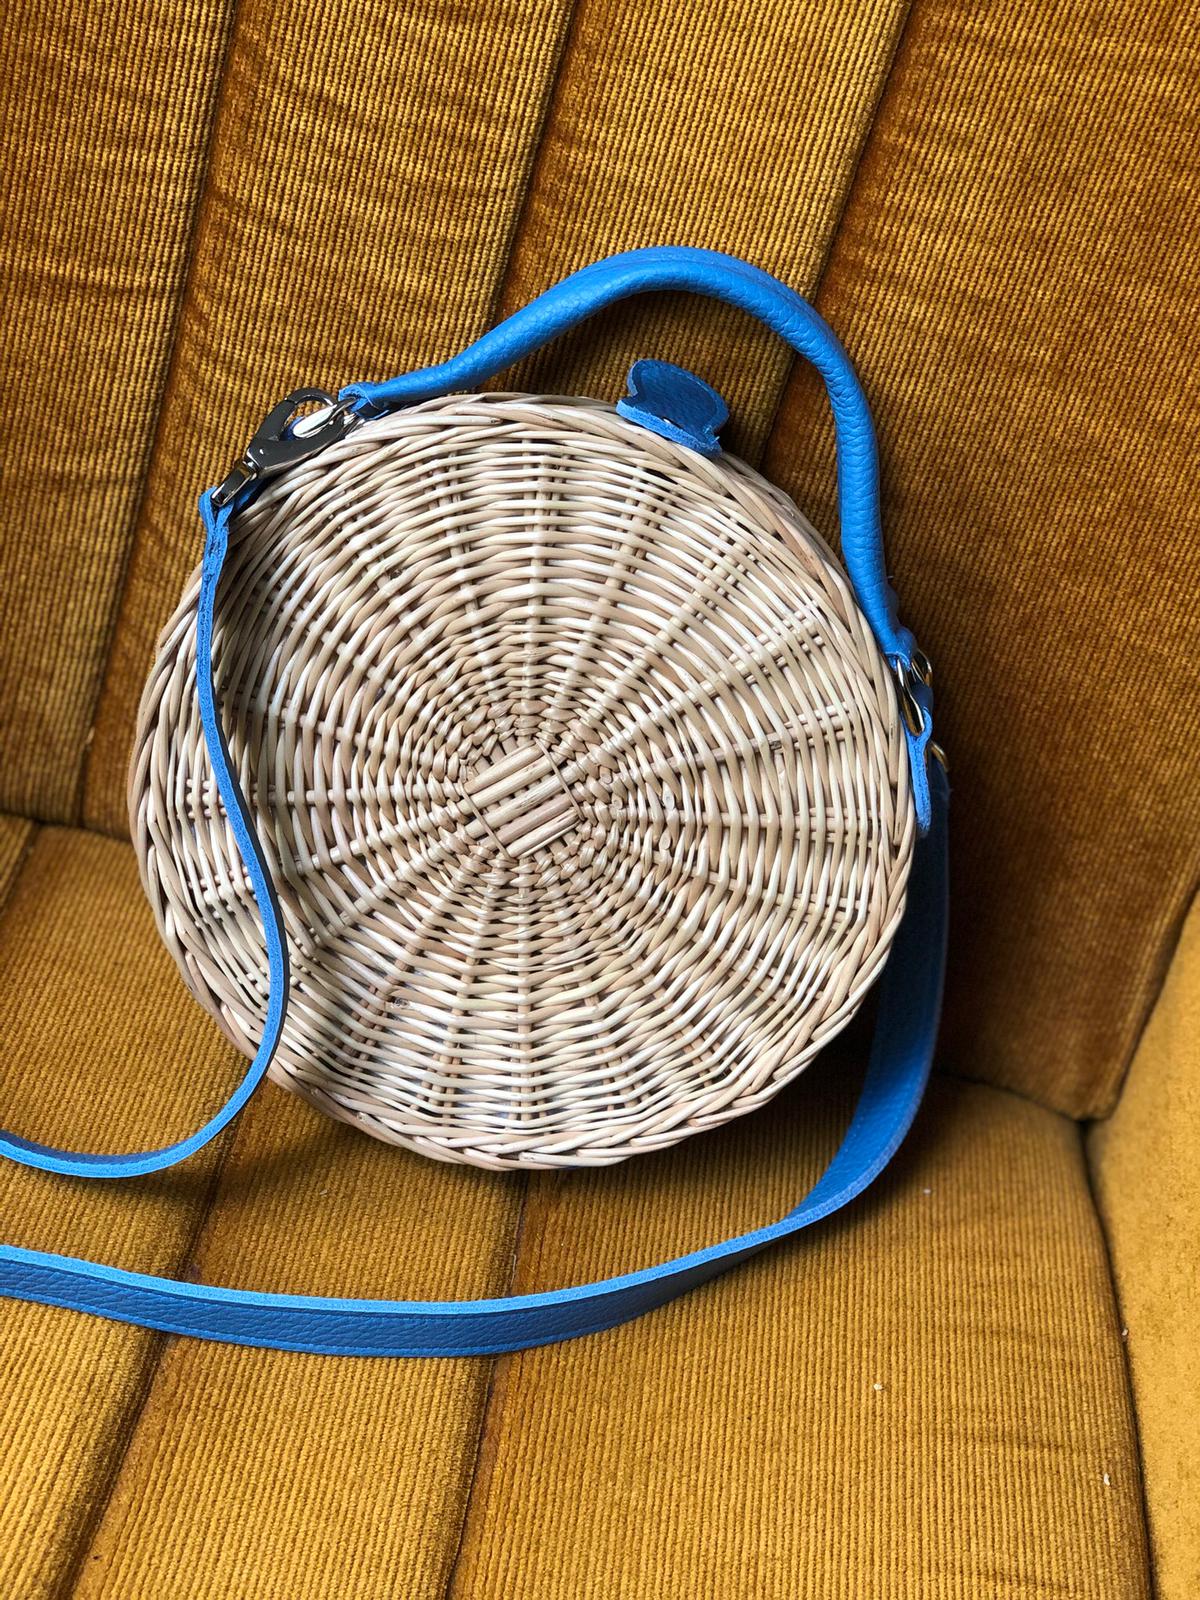 FORGET-ME-NOT STRAW bag